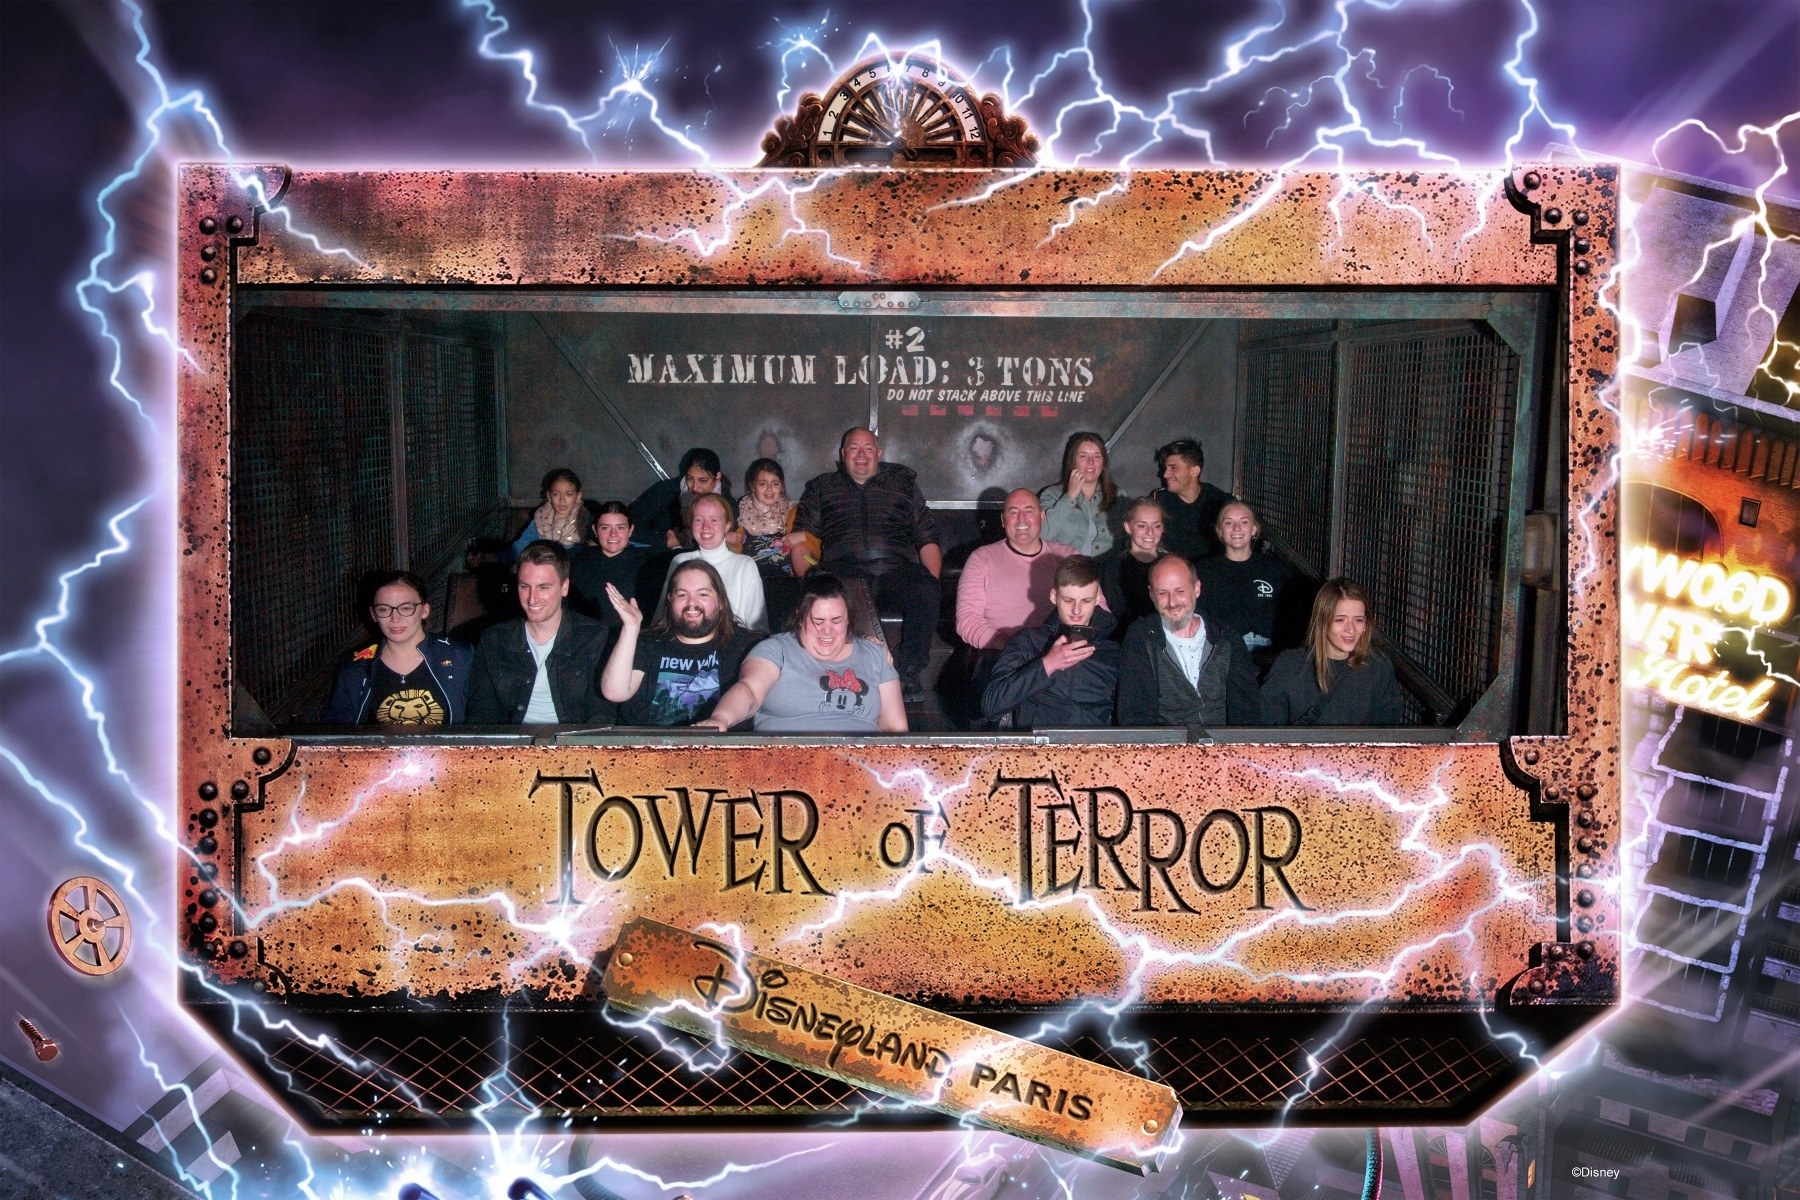 Ride Photo for "Tower of Terror" at Disneyland Paris; Writer & Fiancee featured front and center.